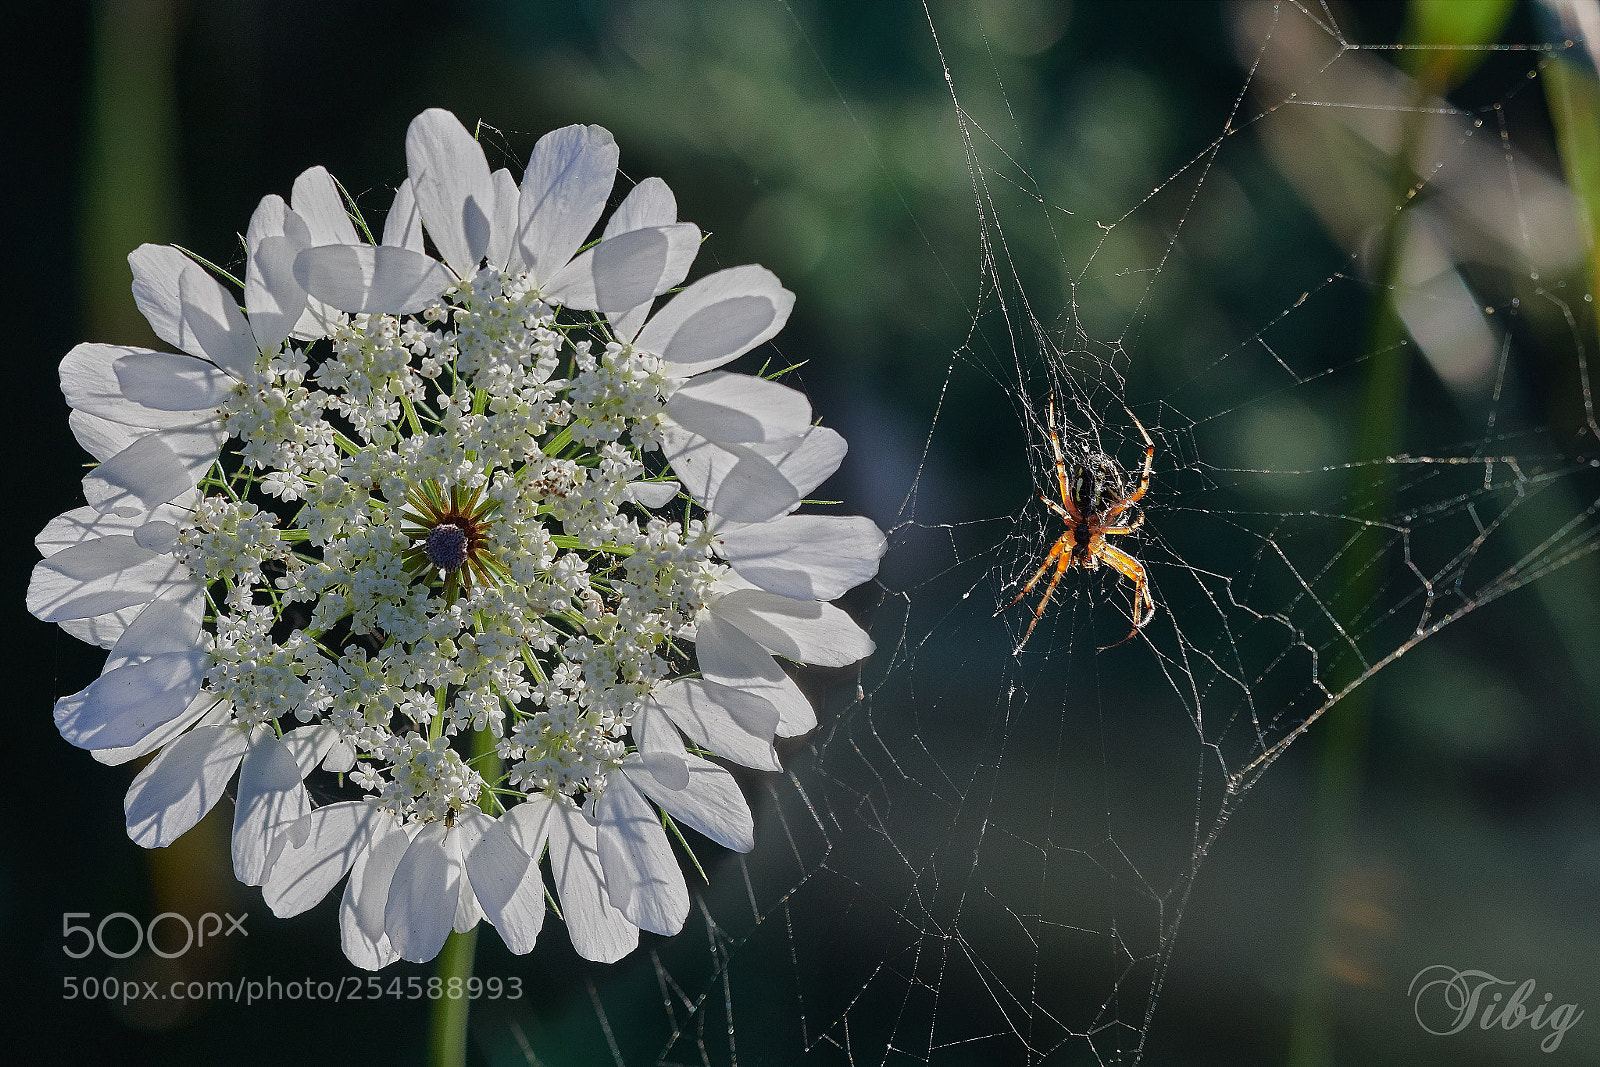 Nikon D500 sample photo. Crown flower and spider photography